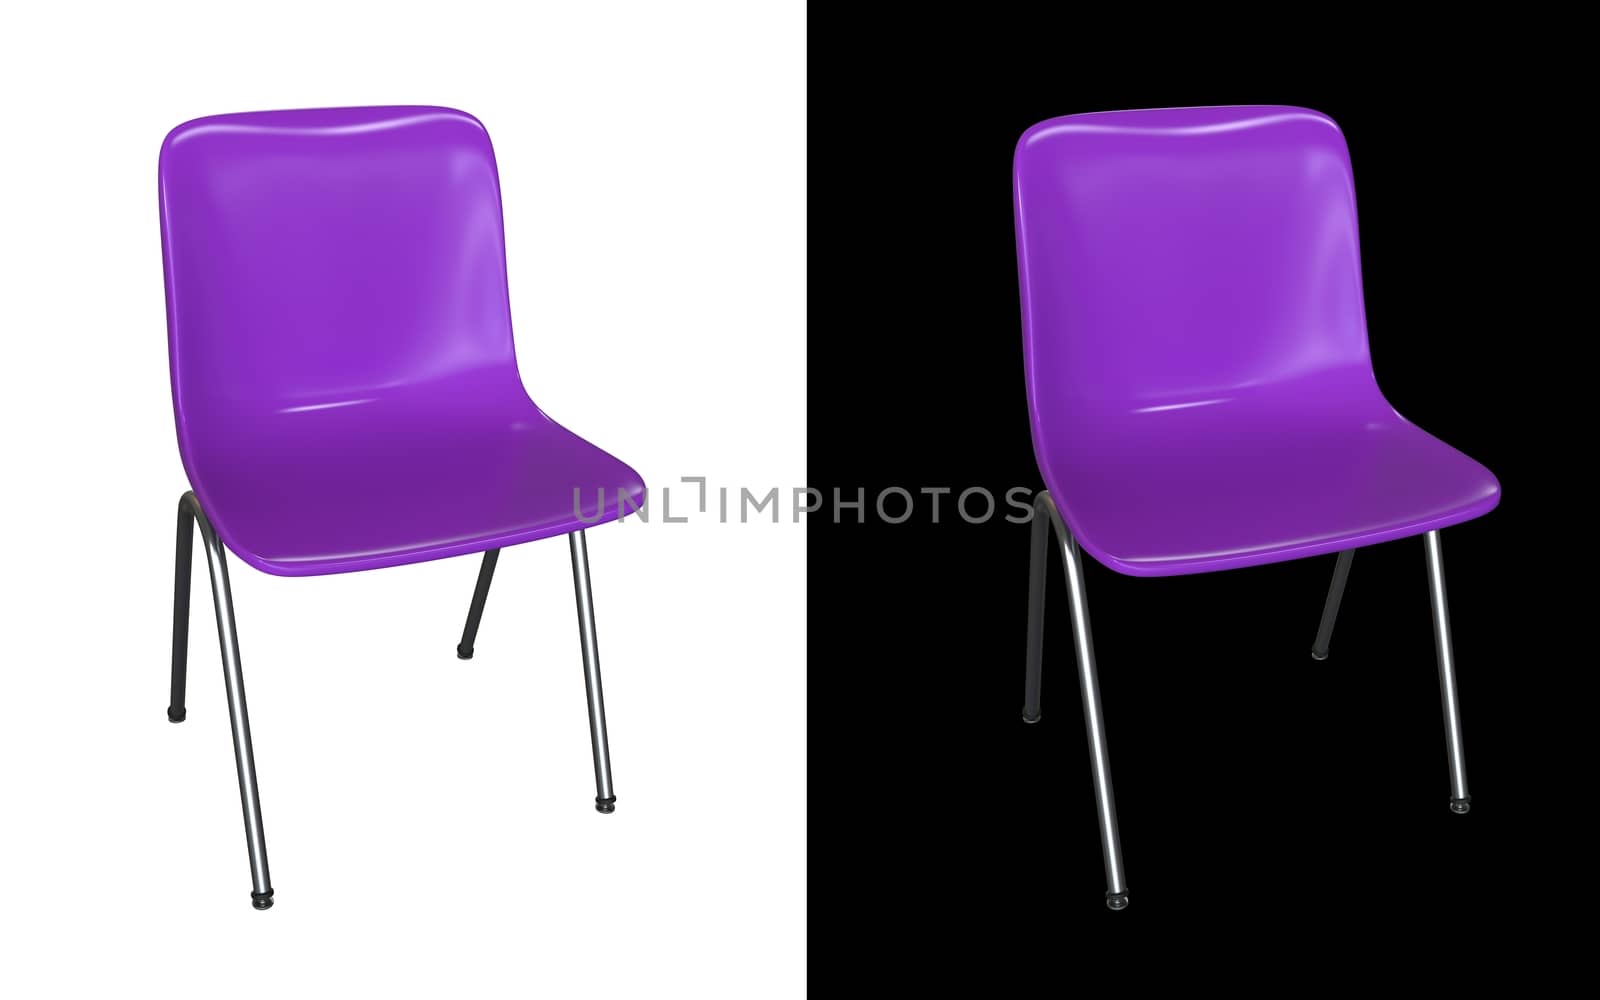 Violet modern chair isolated on black and white background. Kitchen interior, garden or dining room plastic and steel furniture 3d render illustration